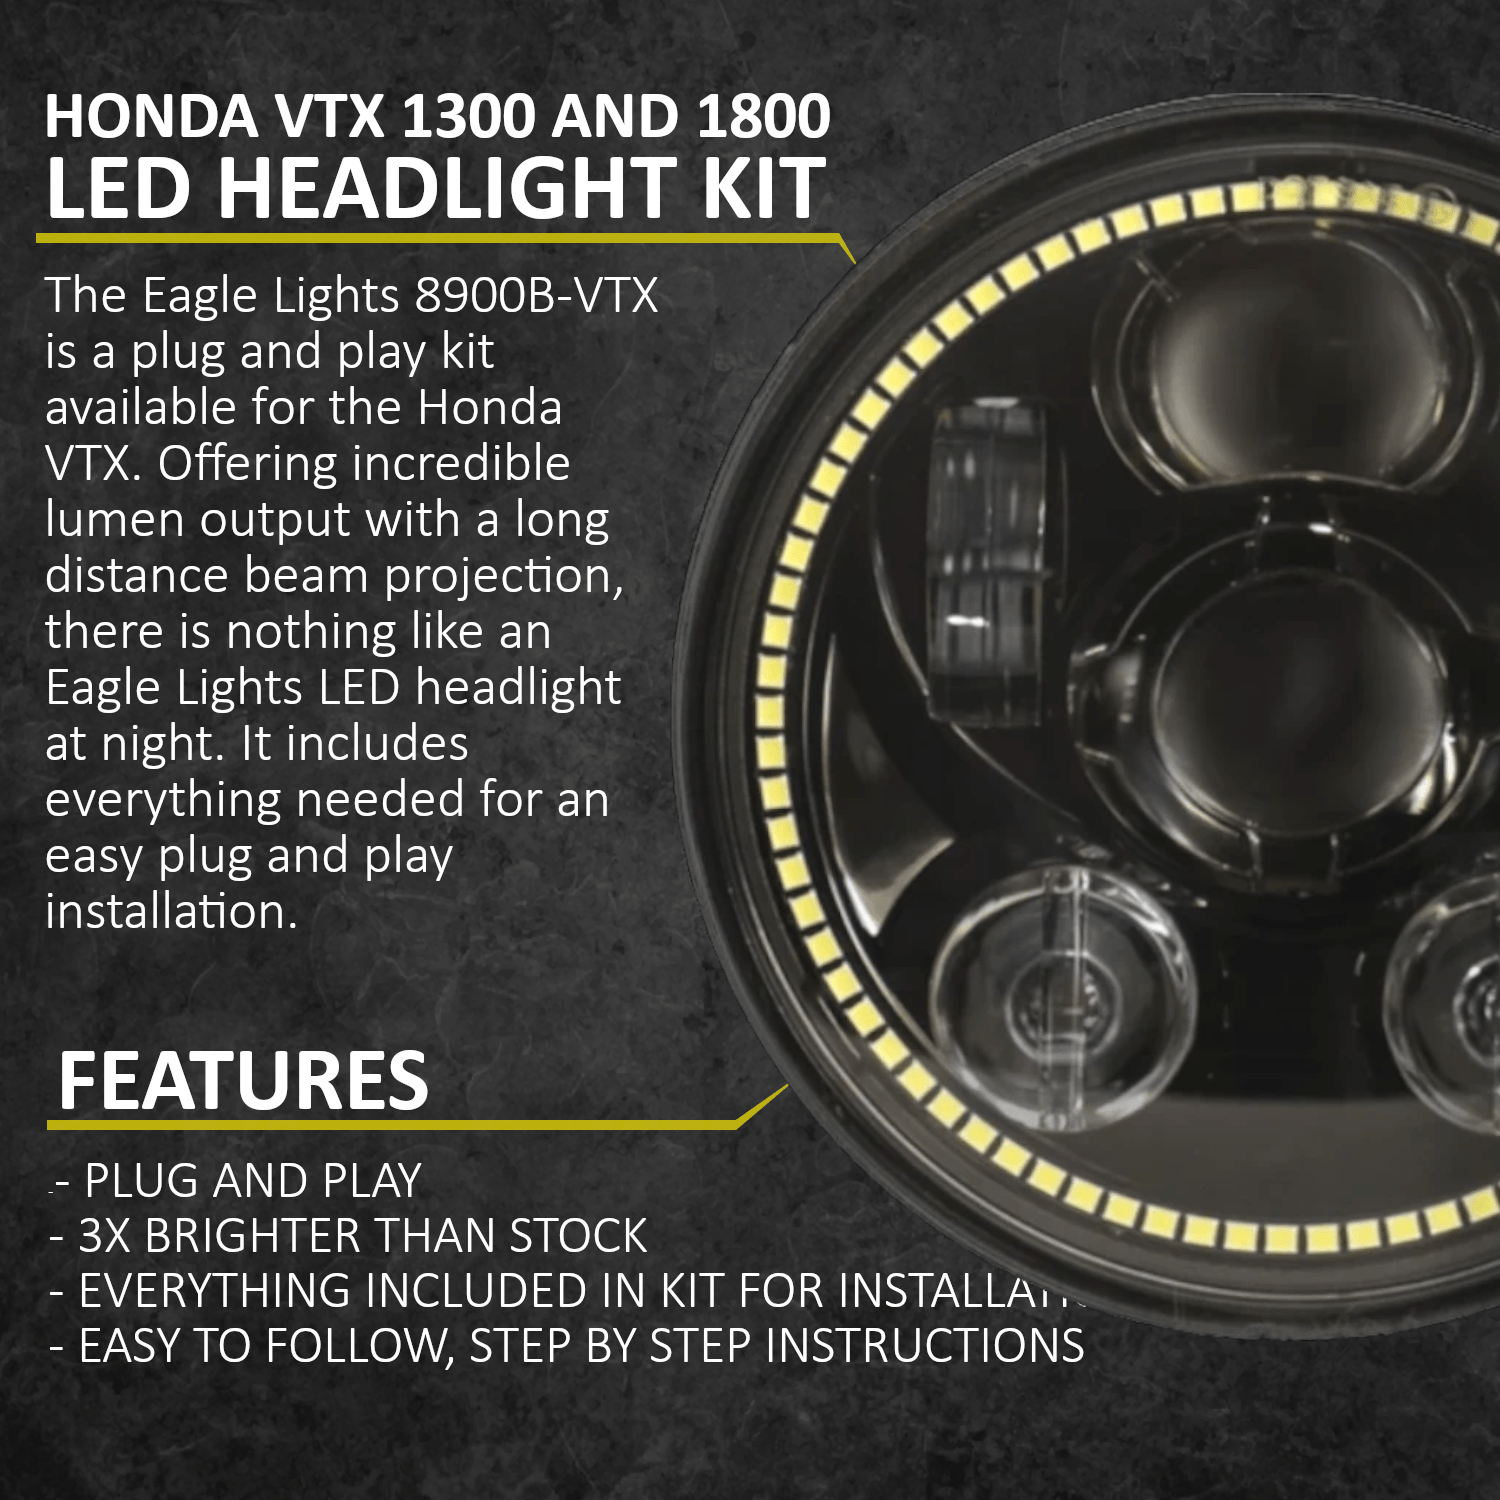 Eagle Lights Generation III LED Headlight with Halo Ring For Honda VTX 1300 and 1800 - Includes VTX Bracket and Hardware